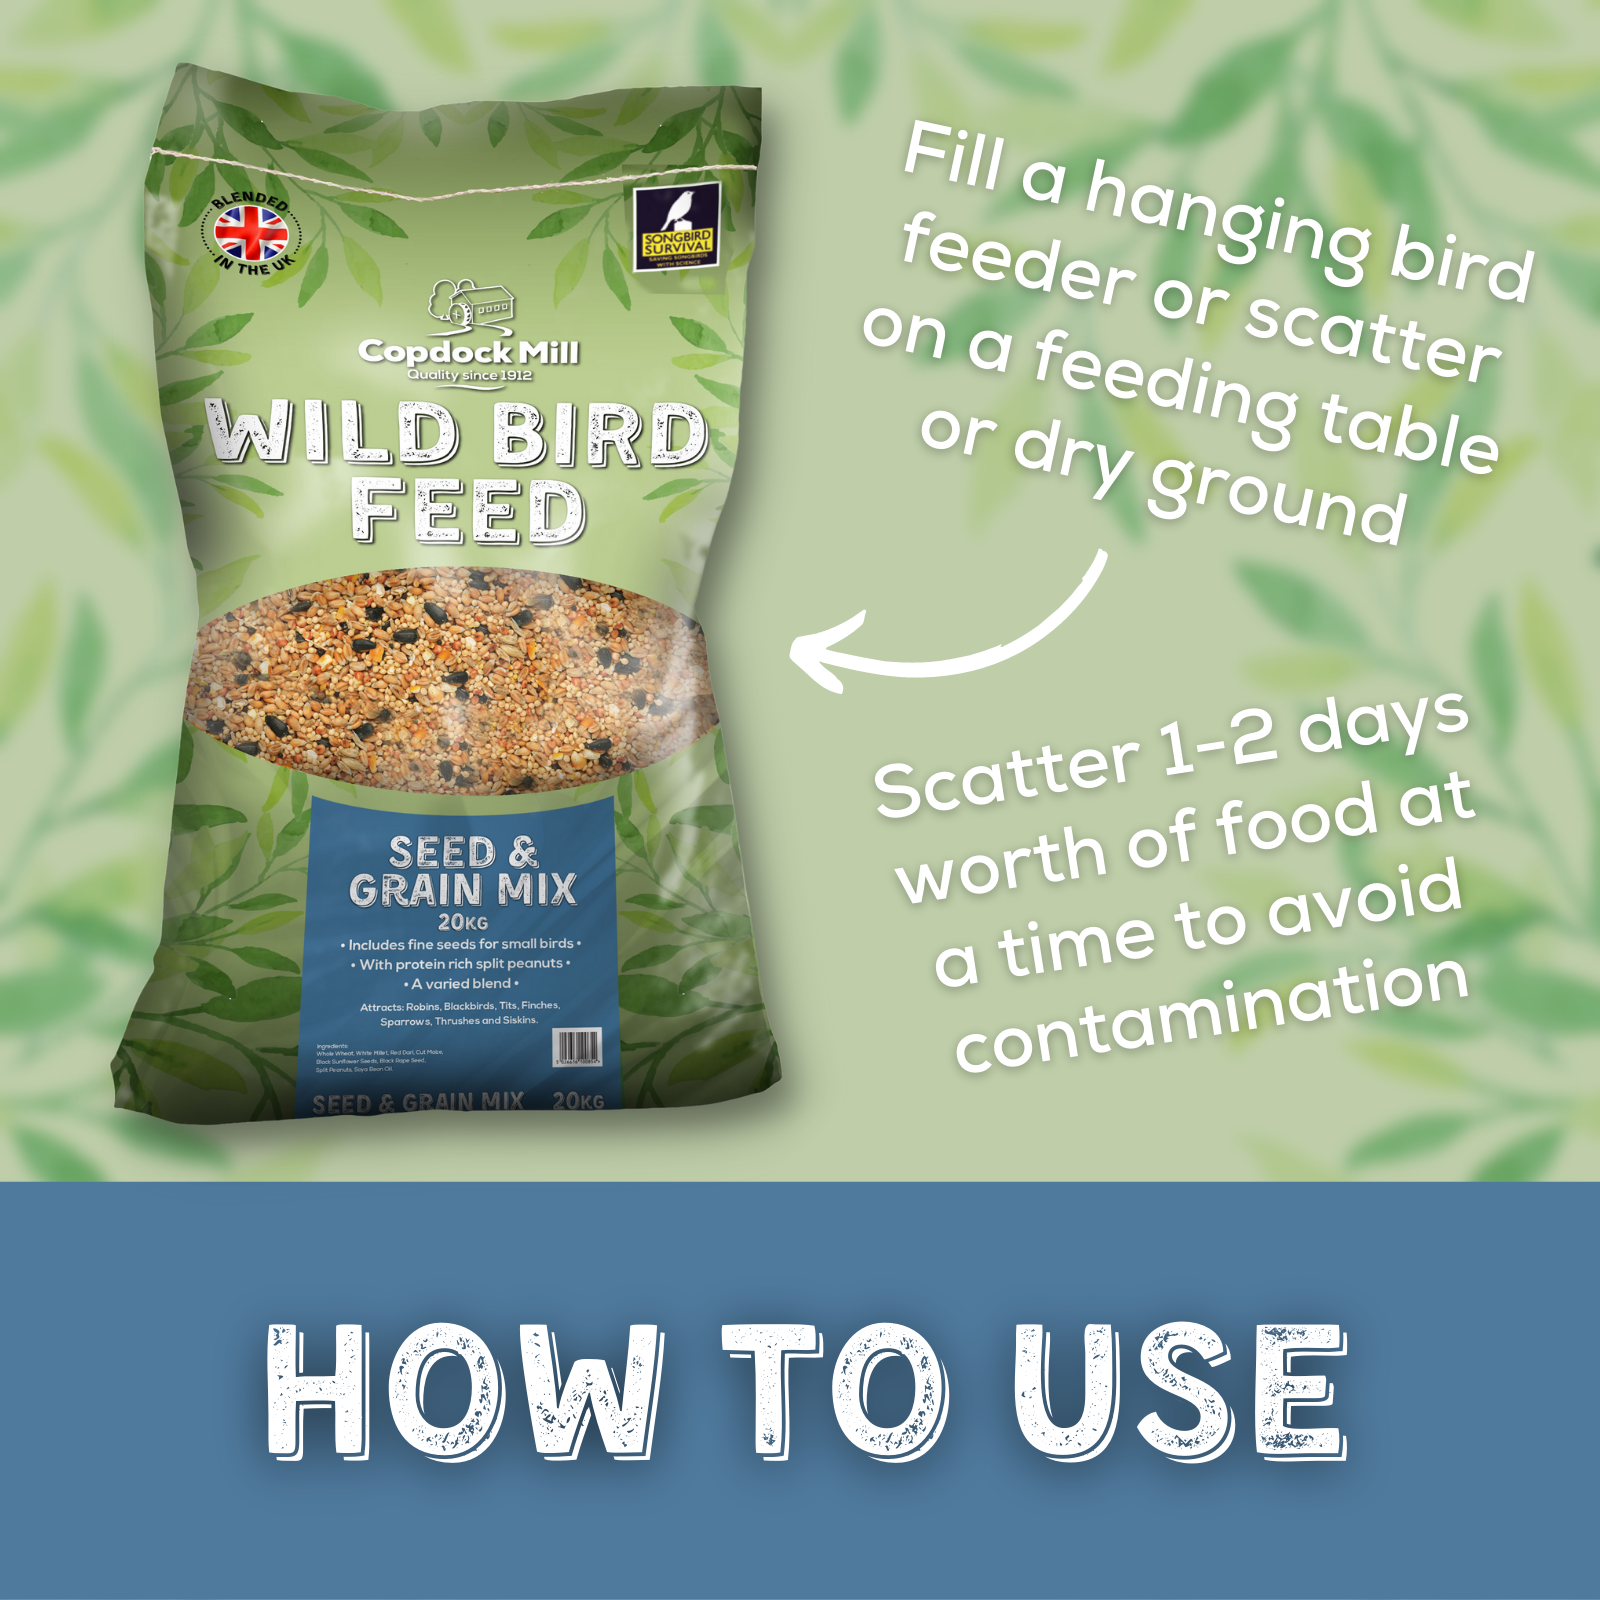 How to use: 1. Fill a hanging bird feeder or scatter on a feeding table or dry ground. 2. Scatter 1-2 days worth of food at a time to avoid contamination.